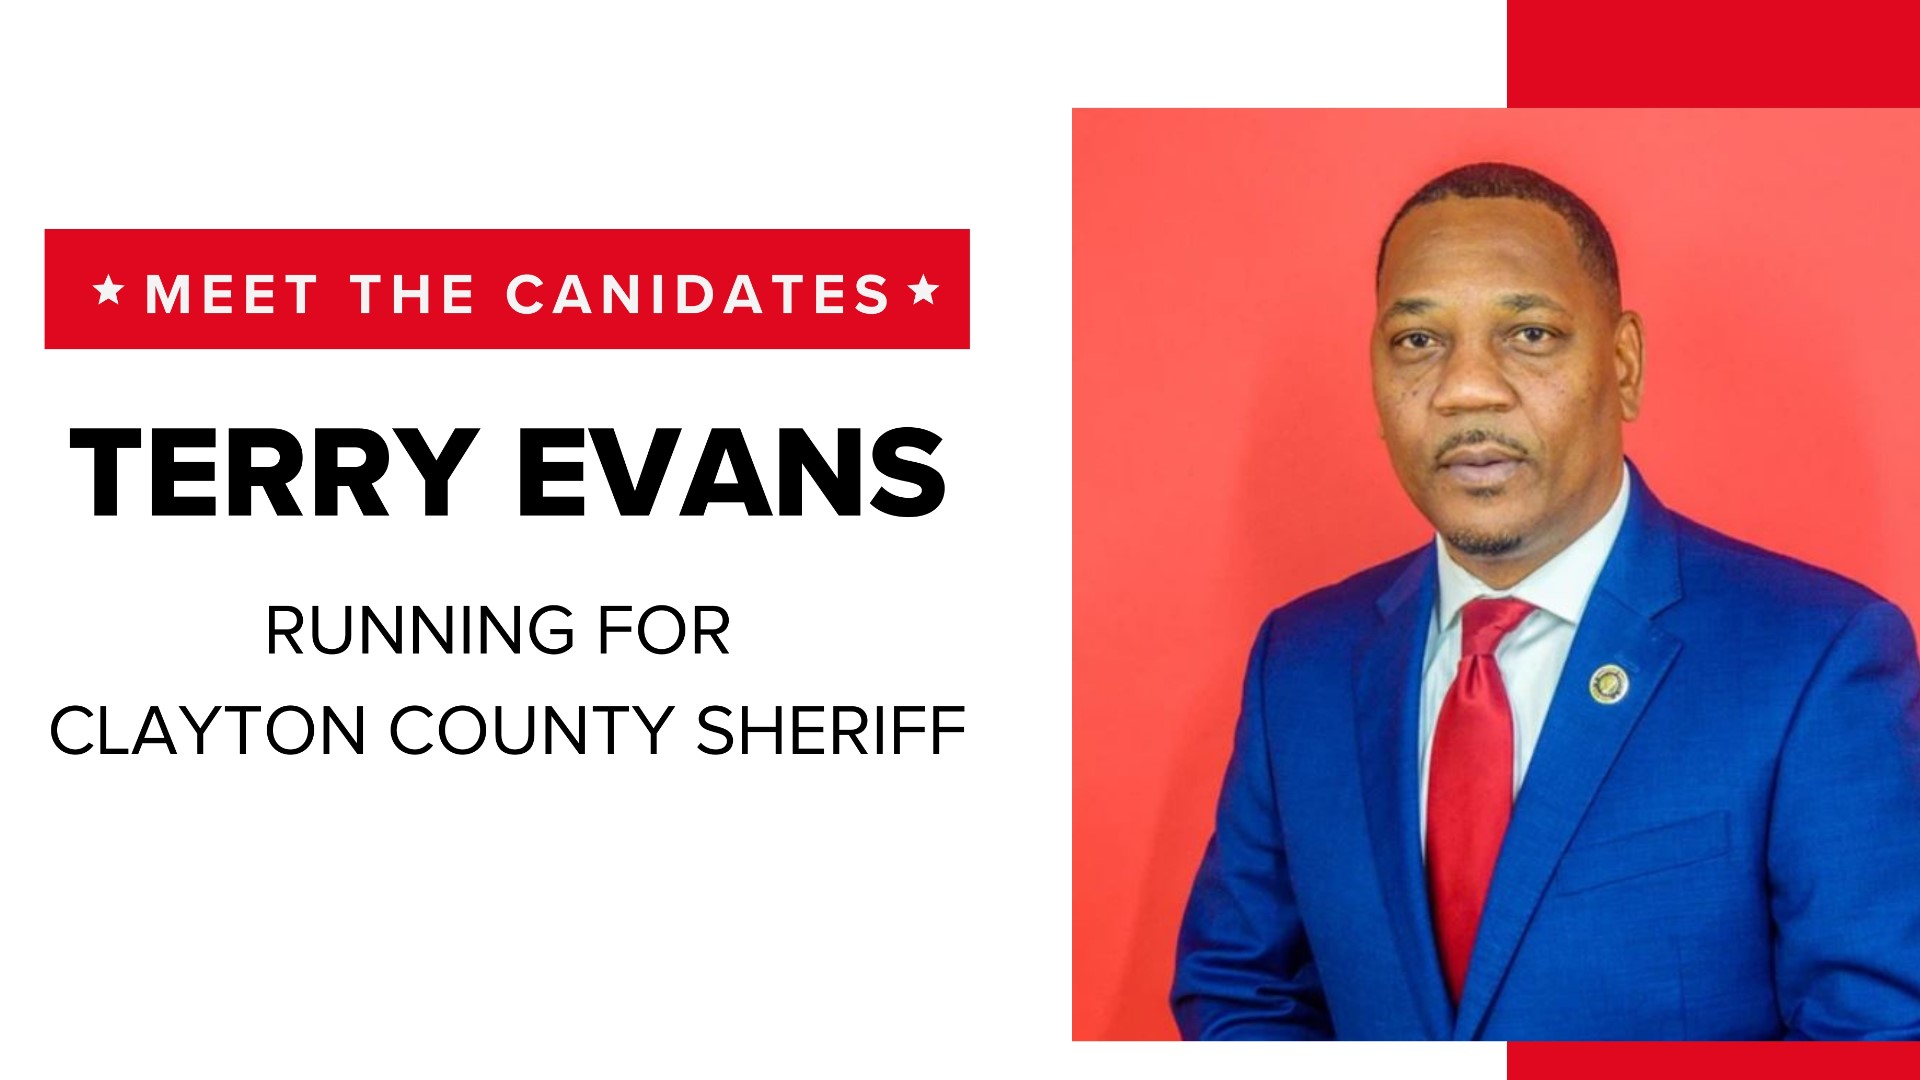 Terry Evans served 20 years and under three sheriffs in the Clayton County Sheriff's Office.